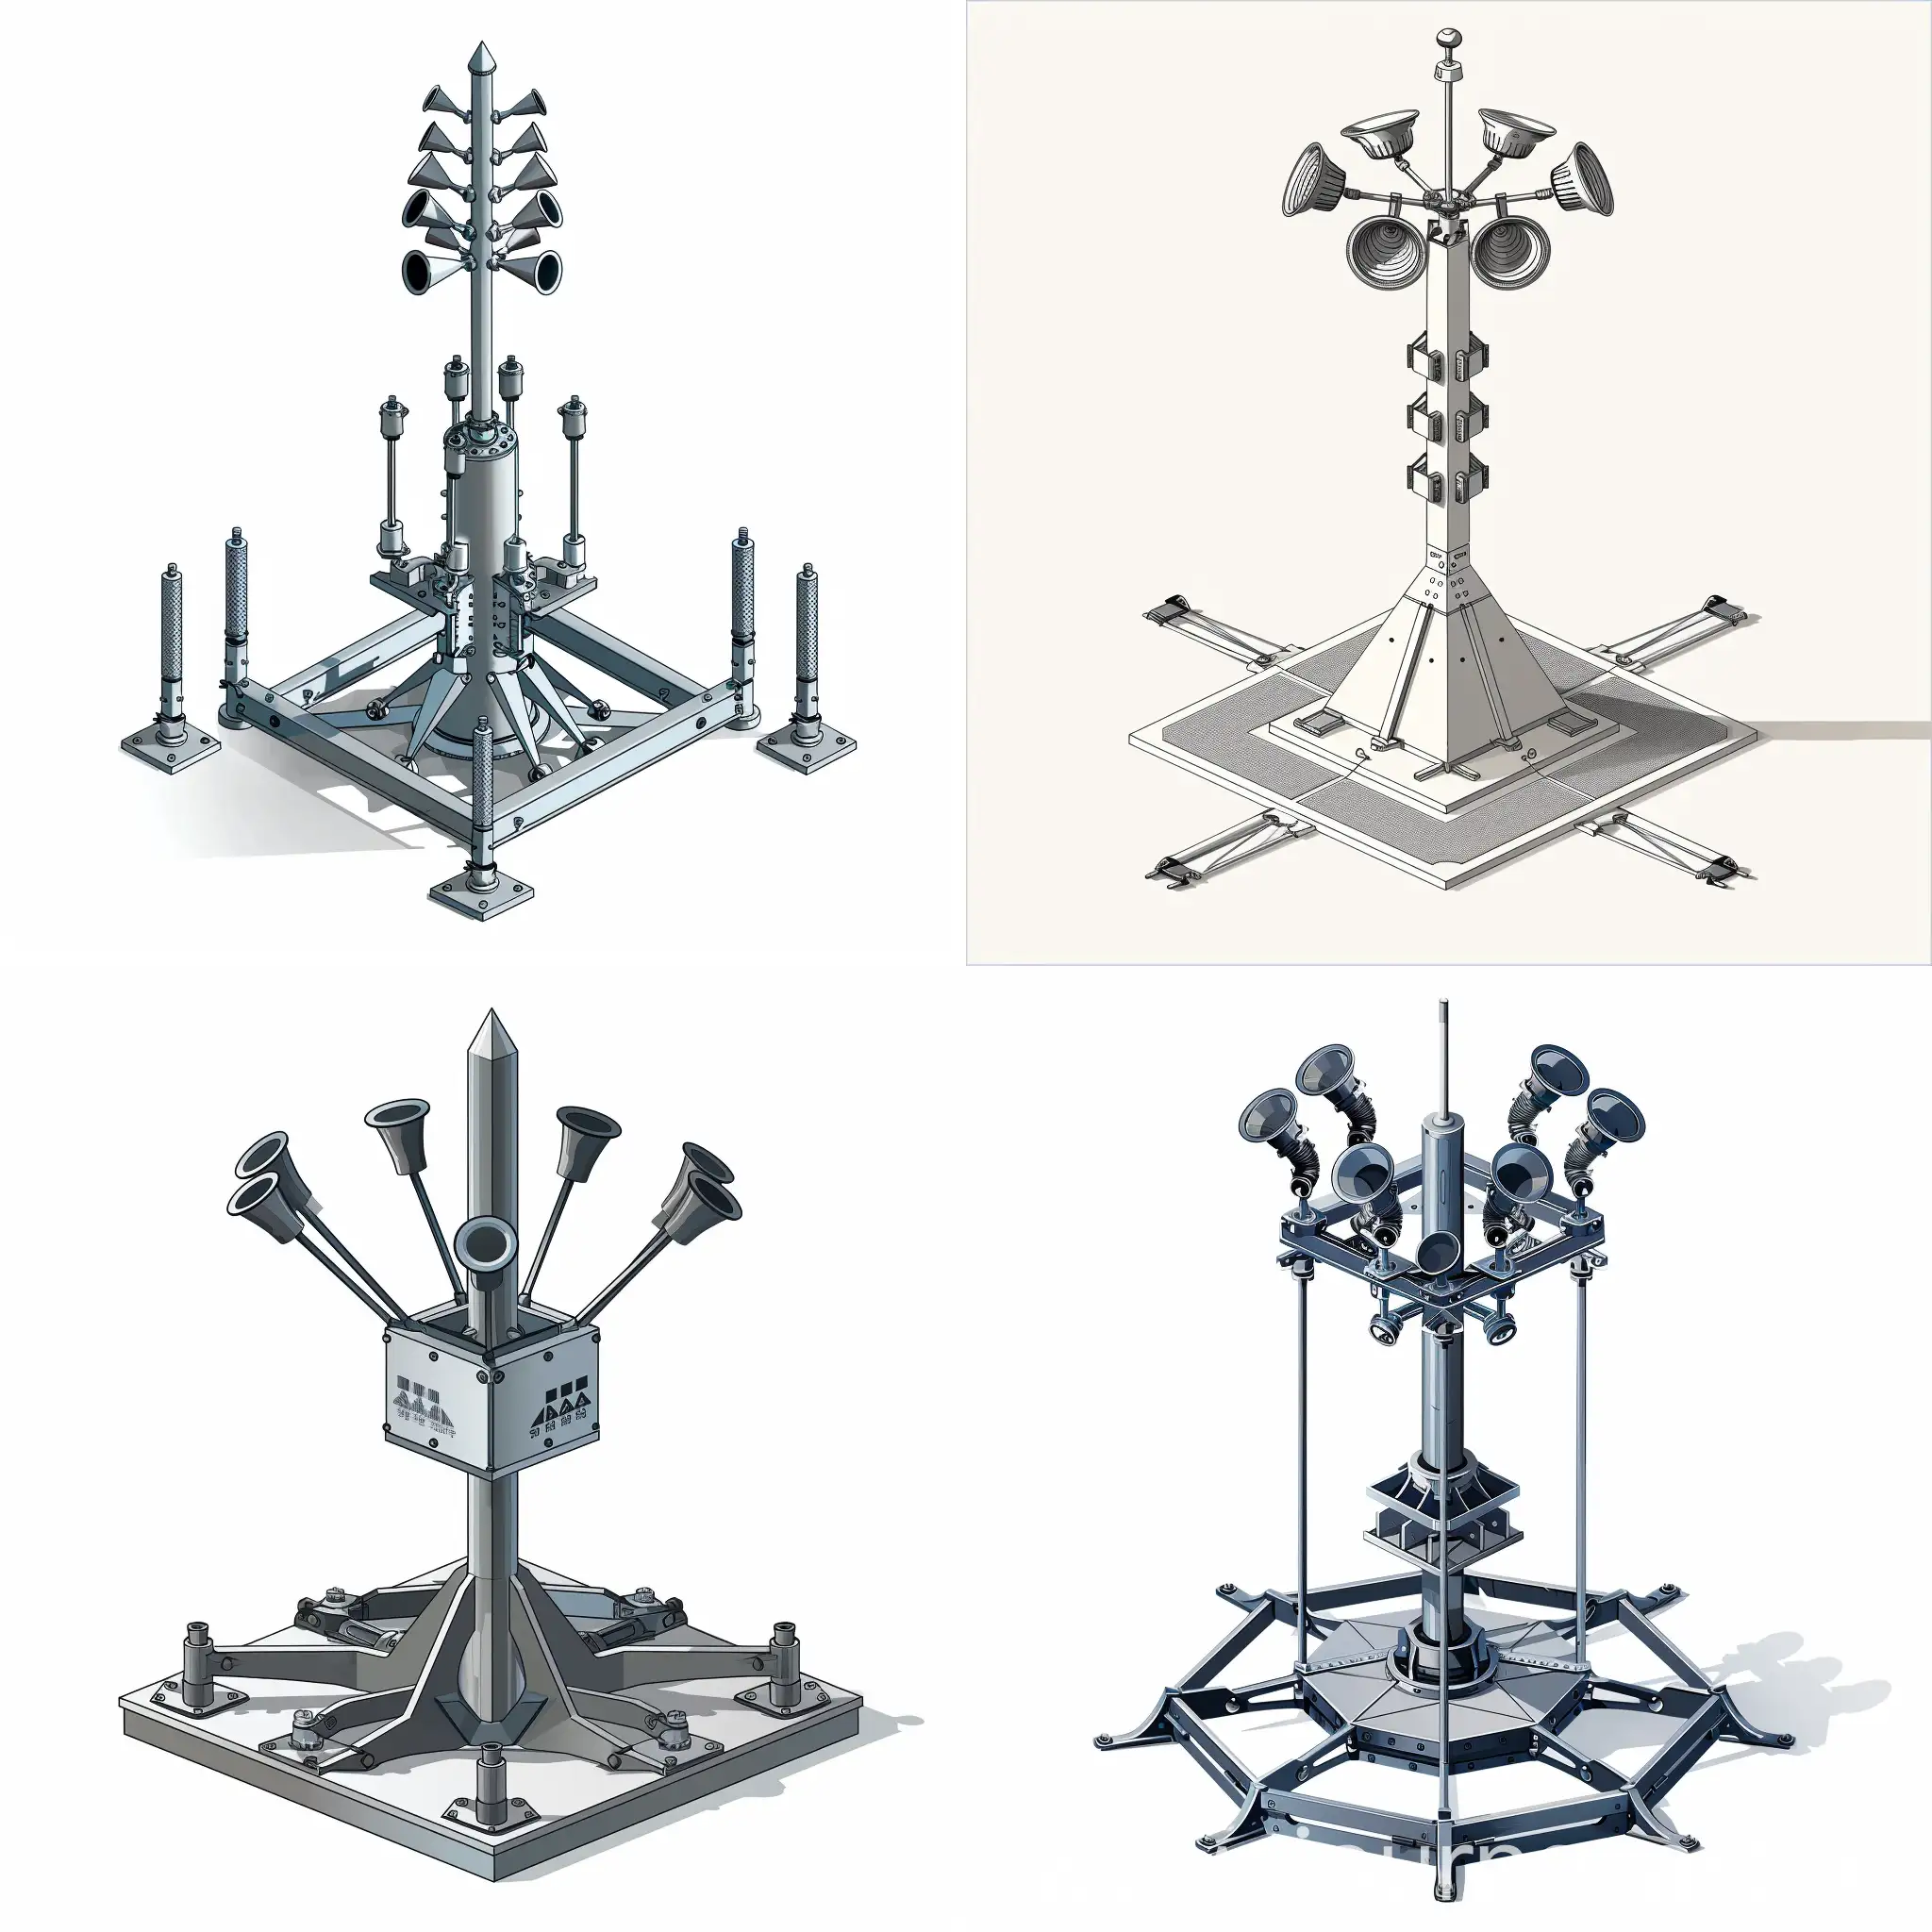 small minimalist simple metallic structure and six metallic arms around  for ground support with one pole structure in the center like a mast with a vertical arrangement of 6 doble sirens horns facing the same direction on the top of the pole with a triangular front for hauling attachment tow platform, stencil for Visio, simple minimalist illustration, low detailed, isometric, white background, warning alert, icon type, industrial structure, no futuristic